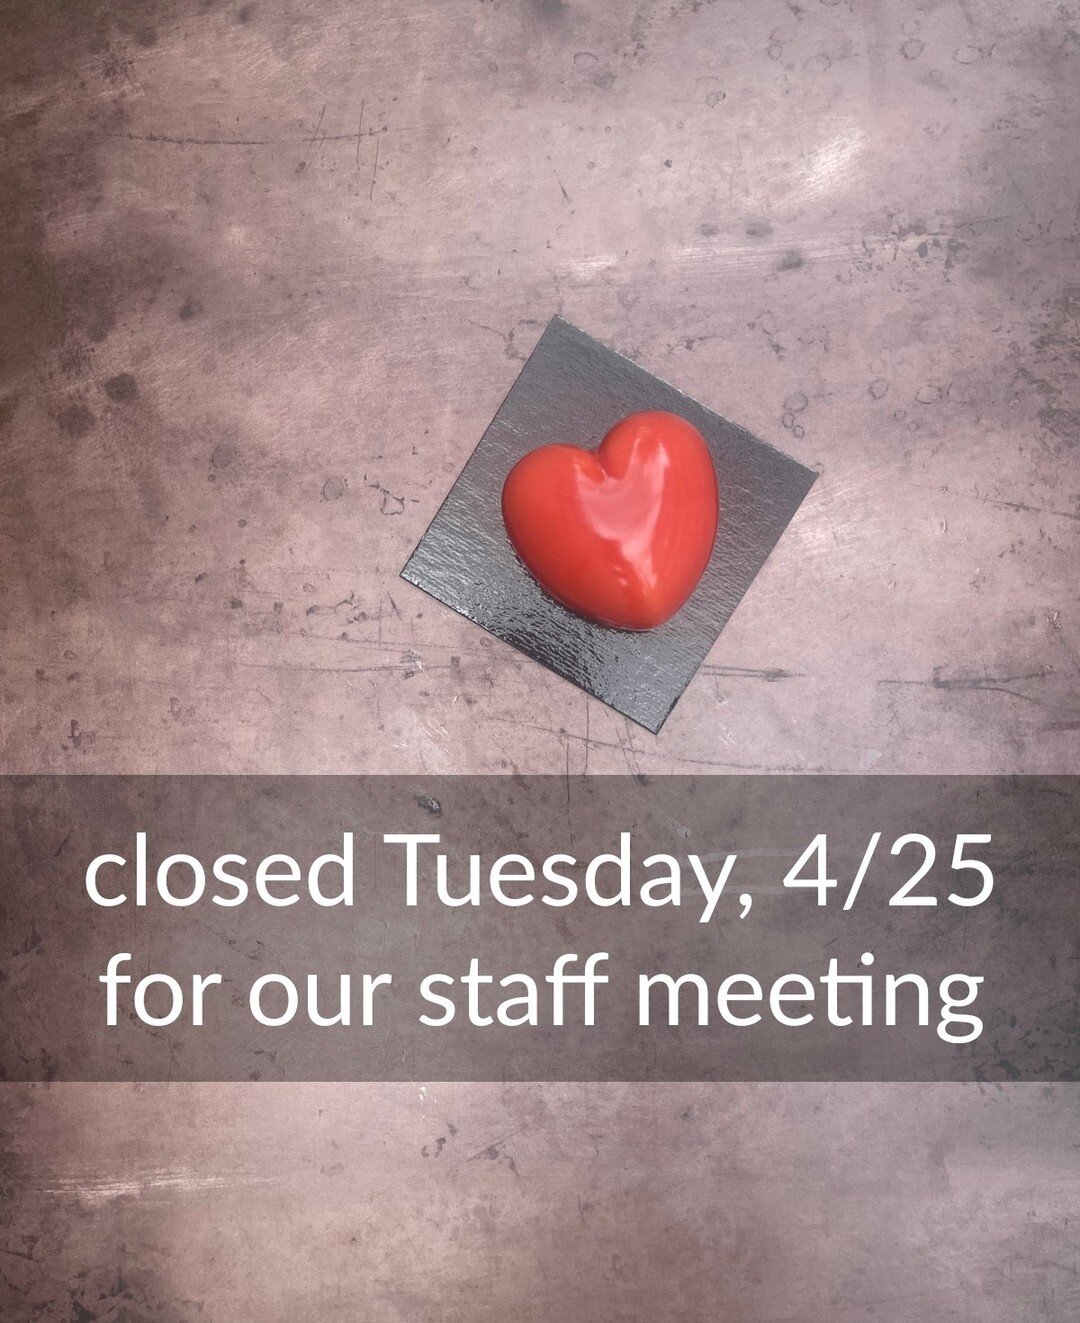 Friendly reminder that we are closed today for a meeting!
We'll see you tomorrow. 🥖🥐☕